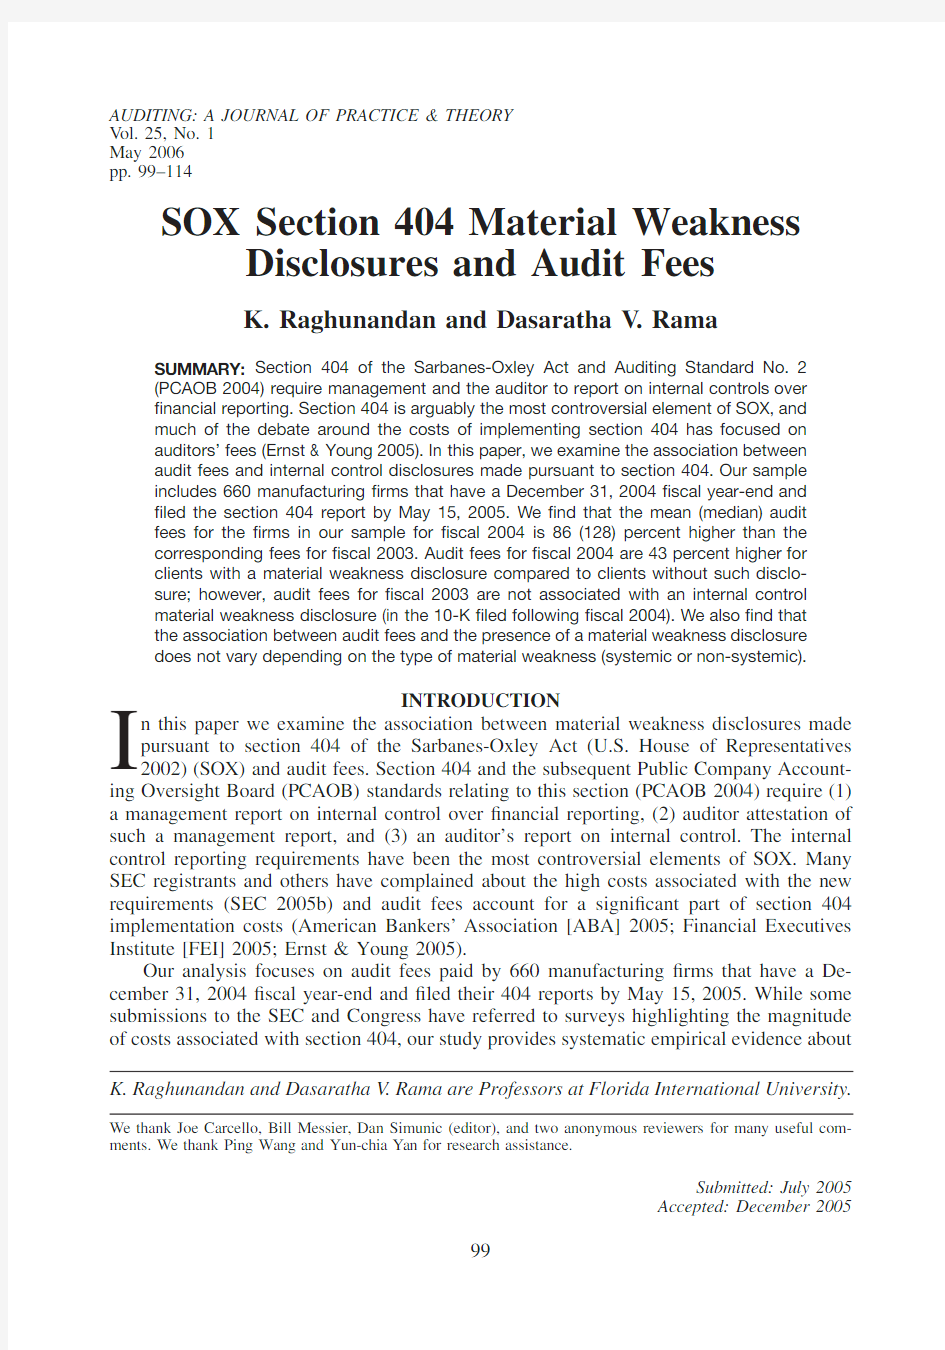 SOX Section 404 Material Weakness Disclosures and Audit Fees